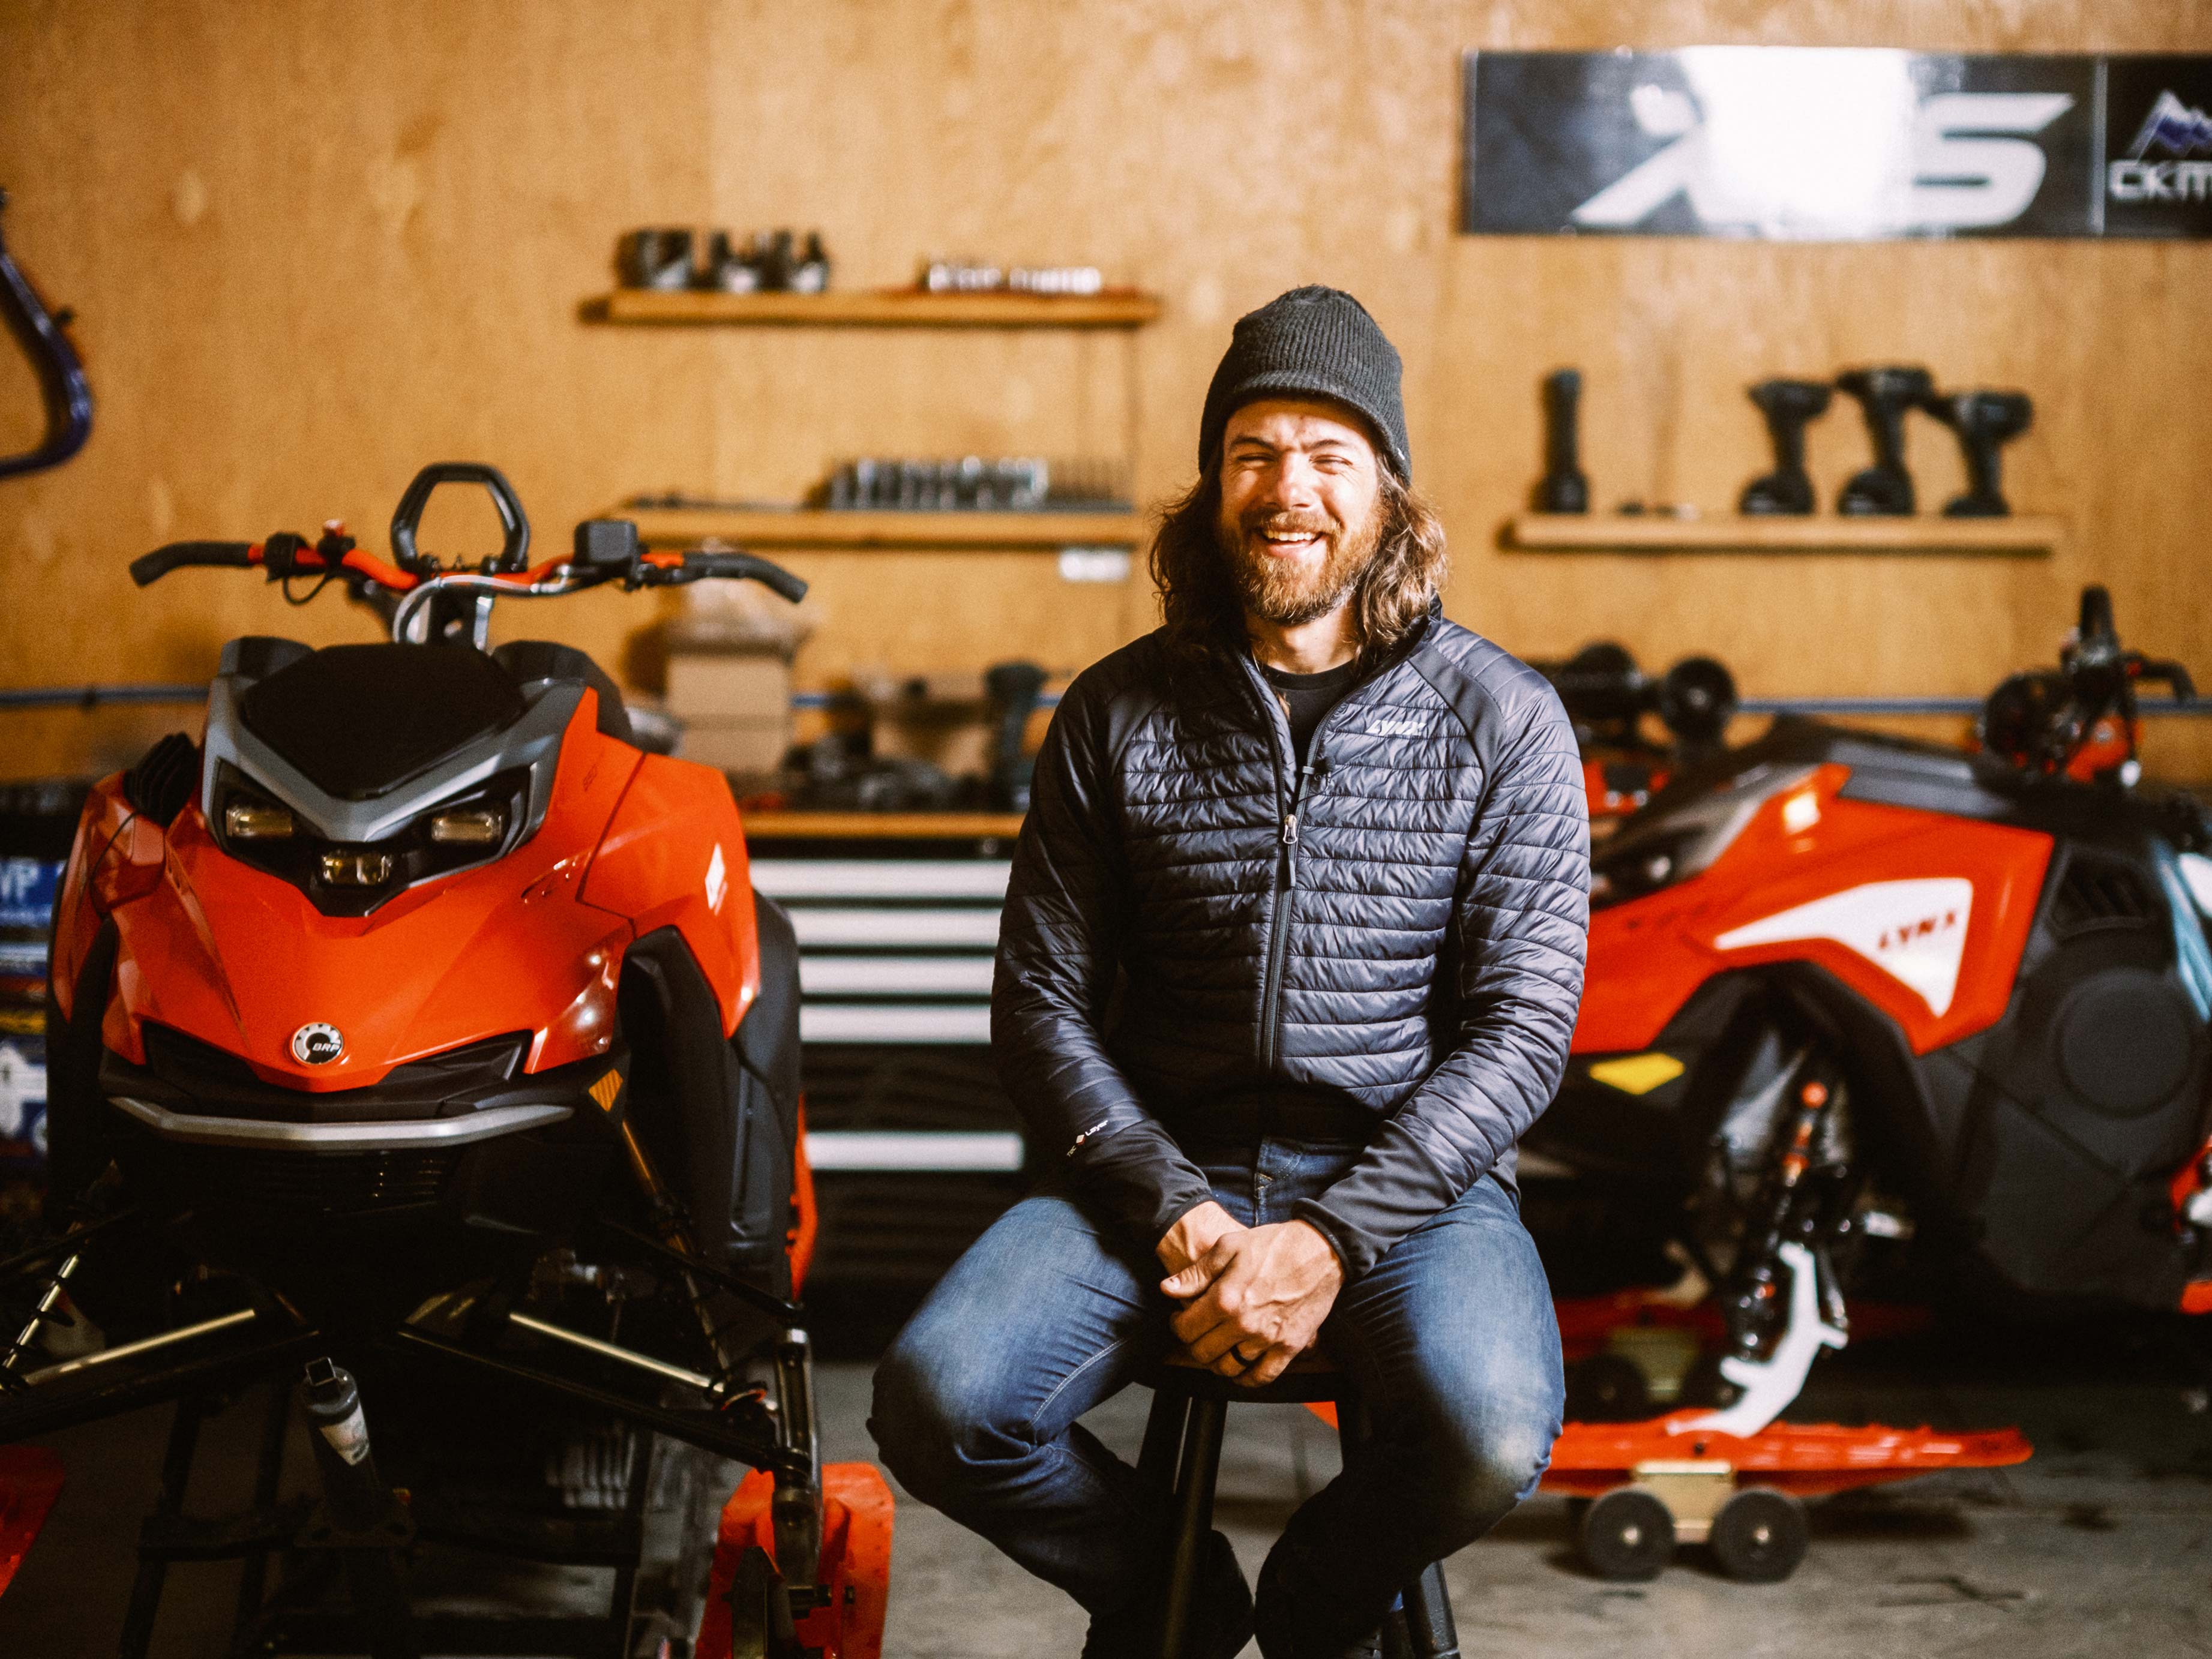 Jason Ribi sitting in front of Lynx sled in a garage